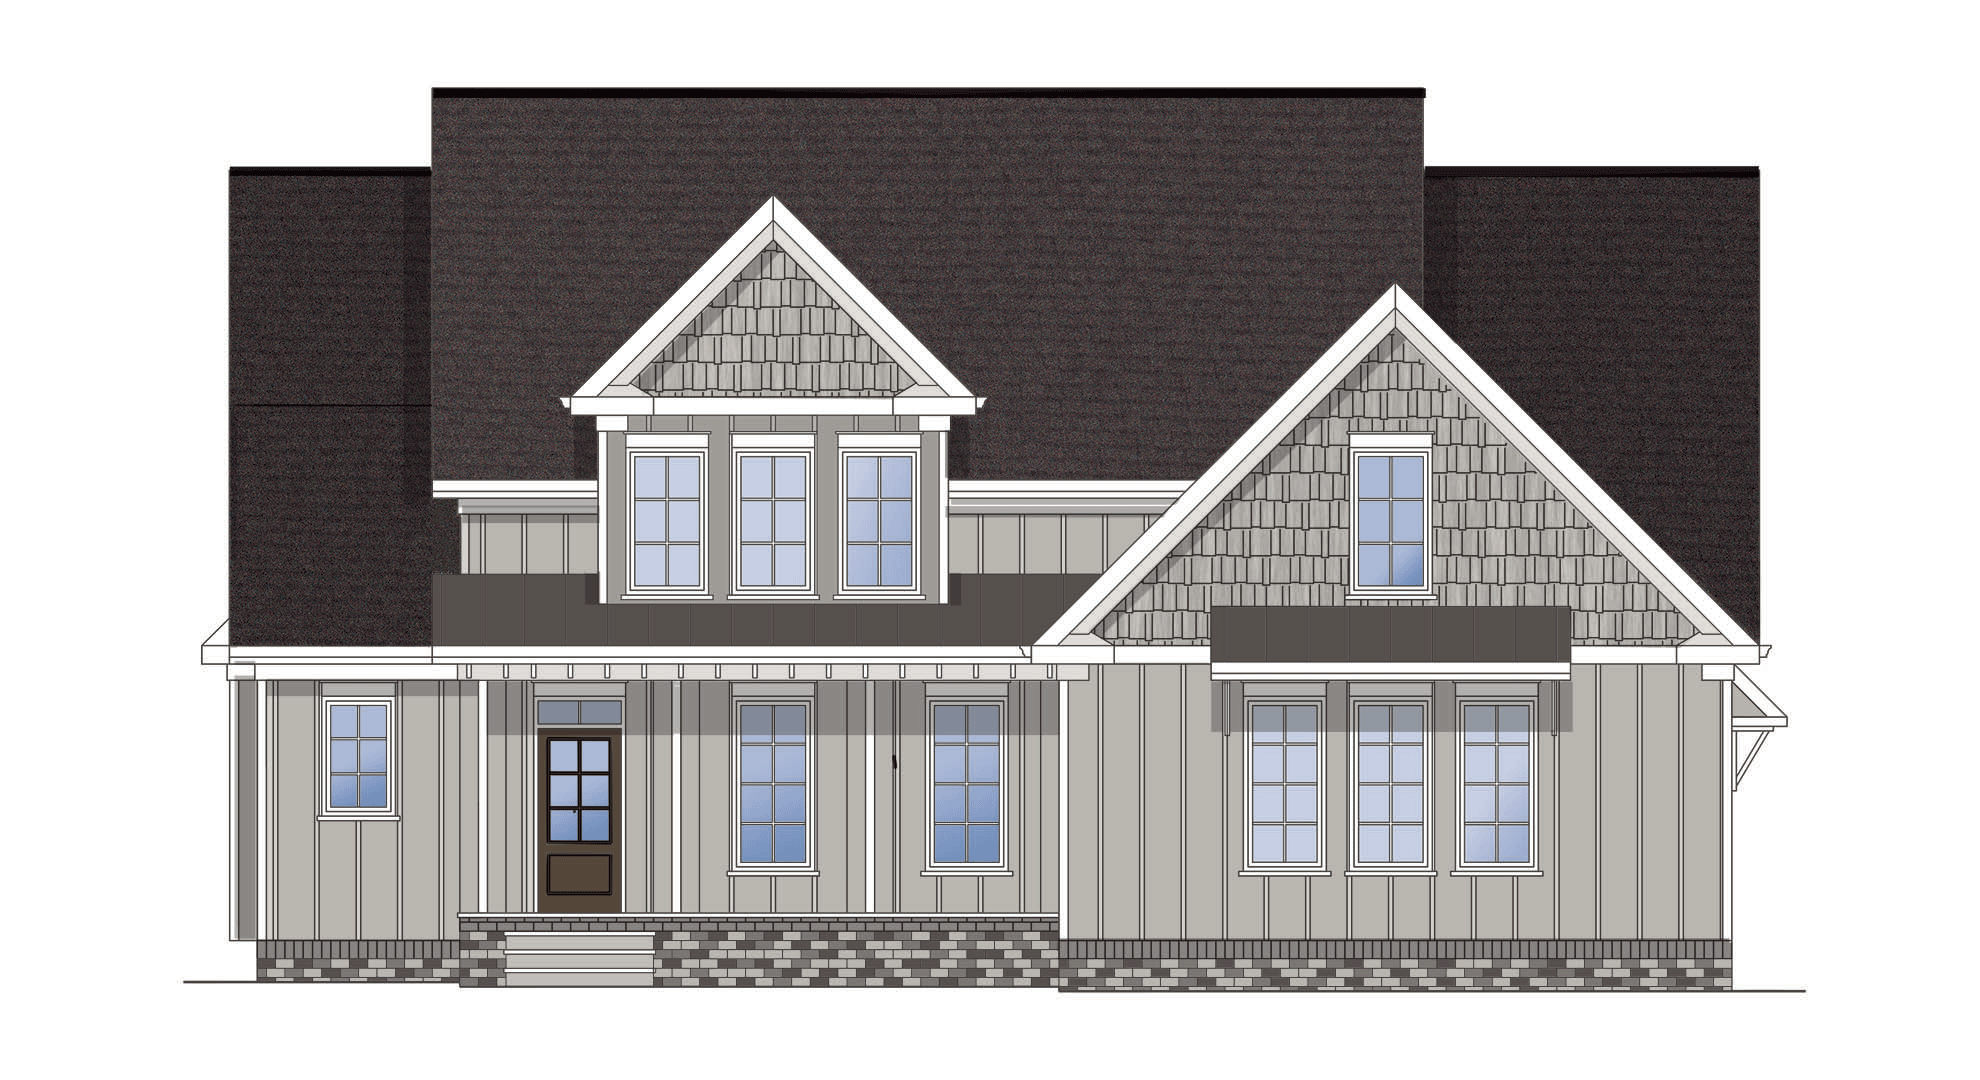 Magnolia - 2 Story House Plans in TN